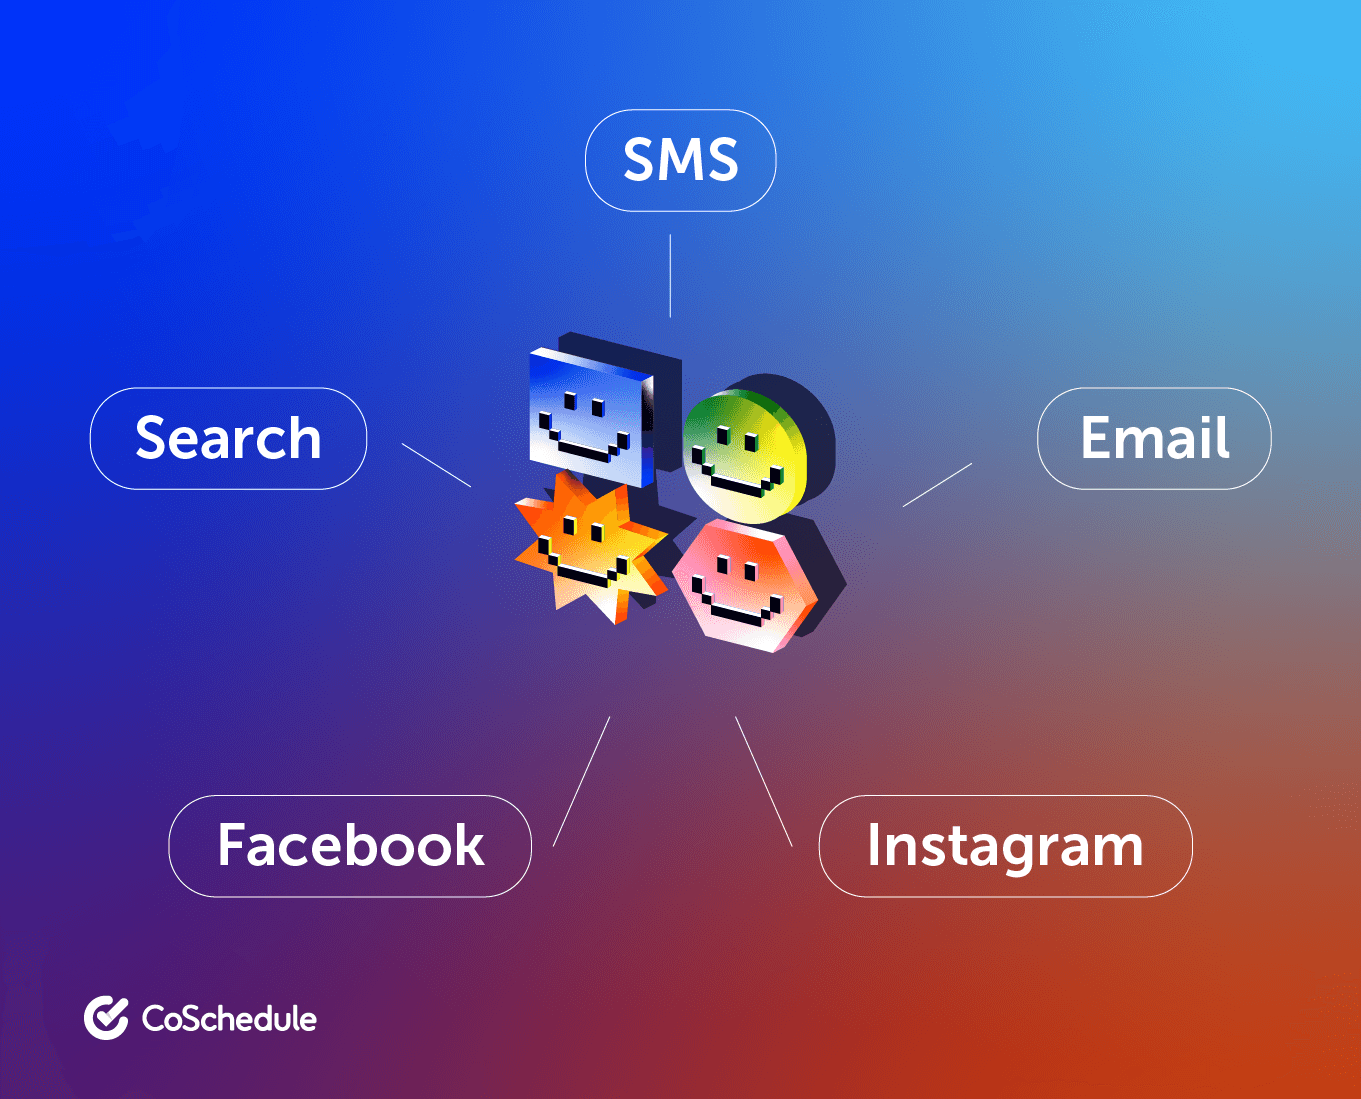 CoSchedule showing how sms, search, facebook. email and instagram are all connected.